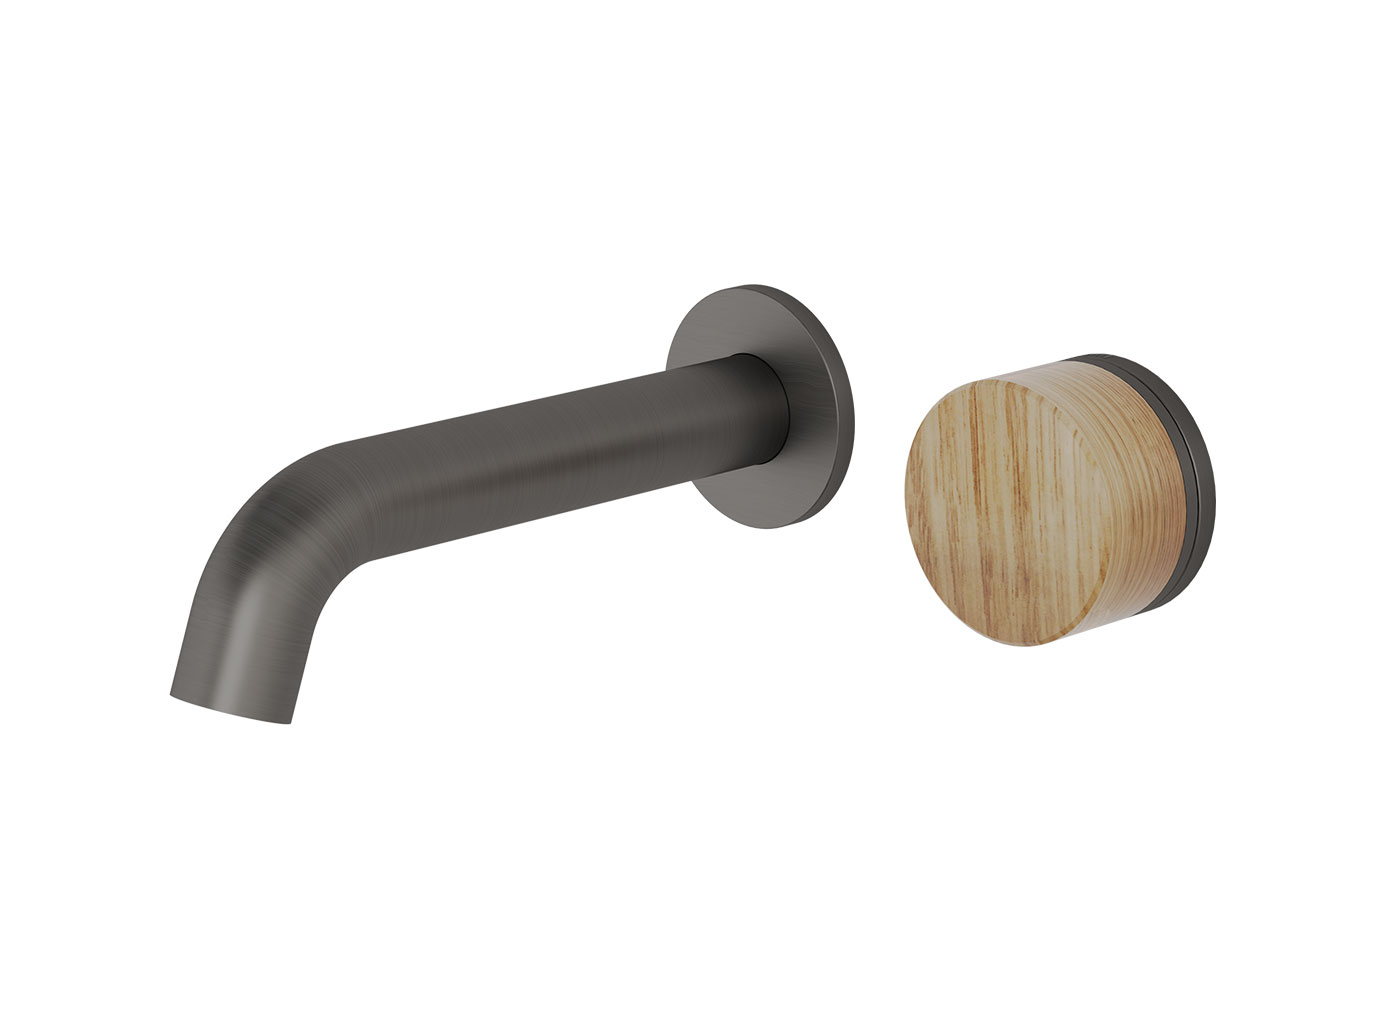 Striking gunmetal tapware featuring a metal knurled detailed handle and your choice of signature Tasmanian timber handle to create a luxury tapware range like none you've seen before.